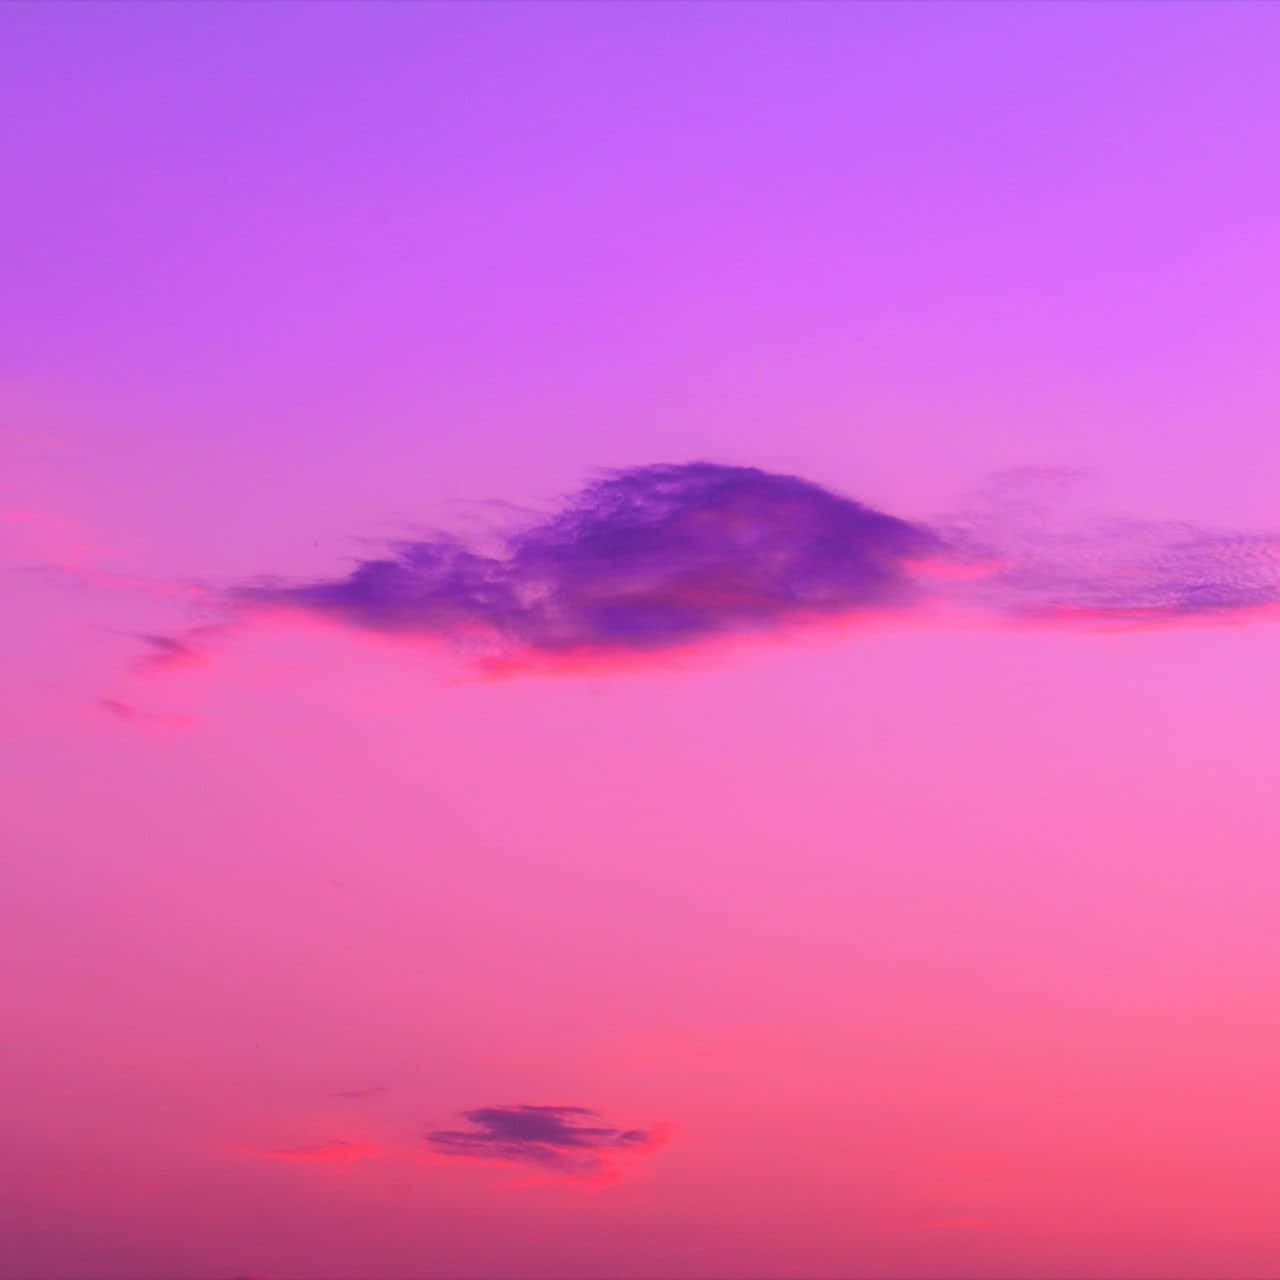 Download A Purple And Pink Sky With A Cloud In The Sky